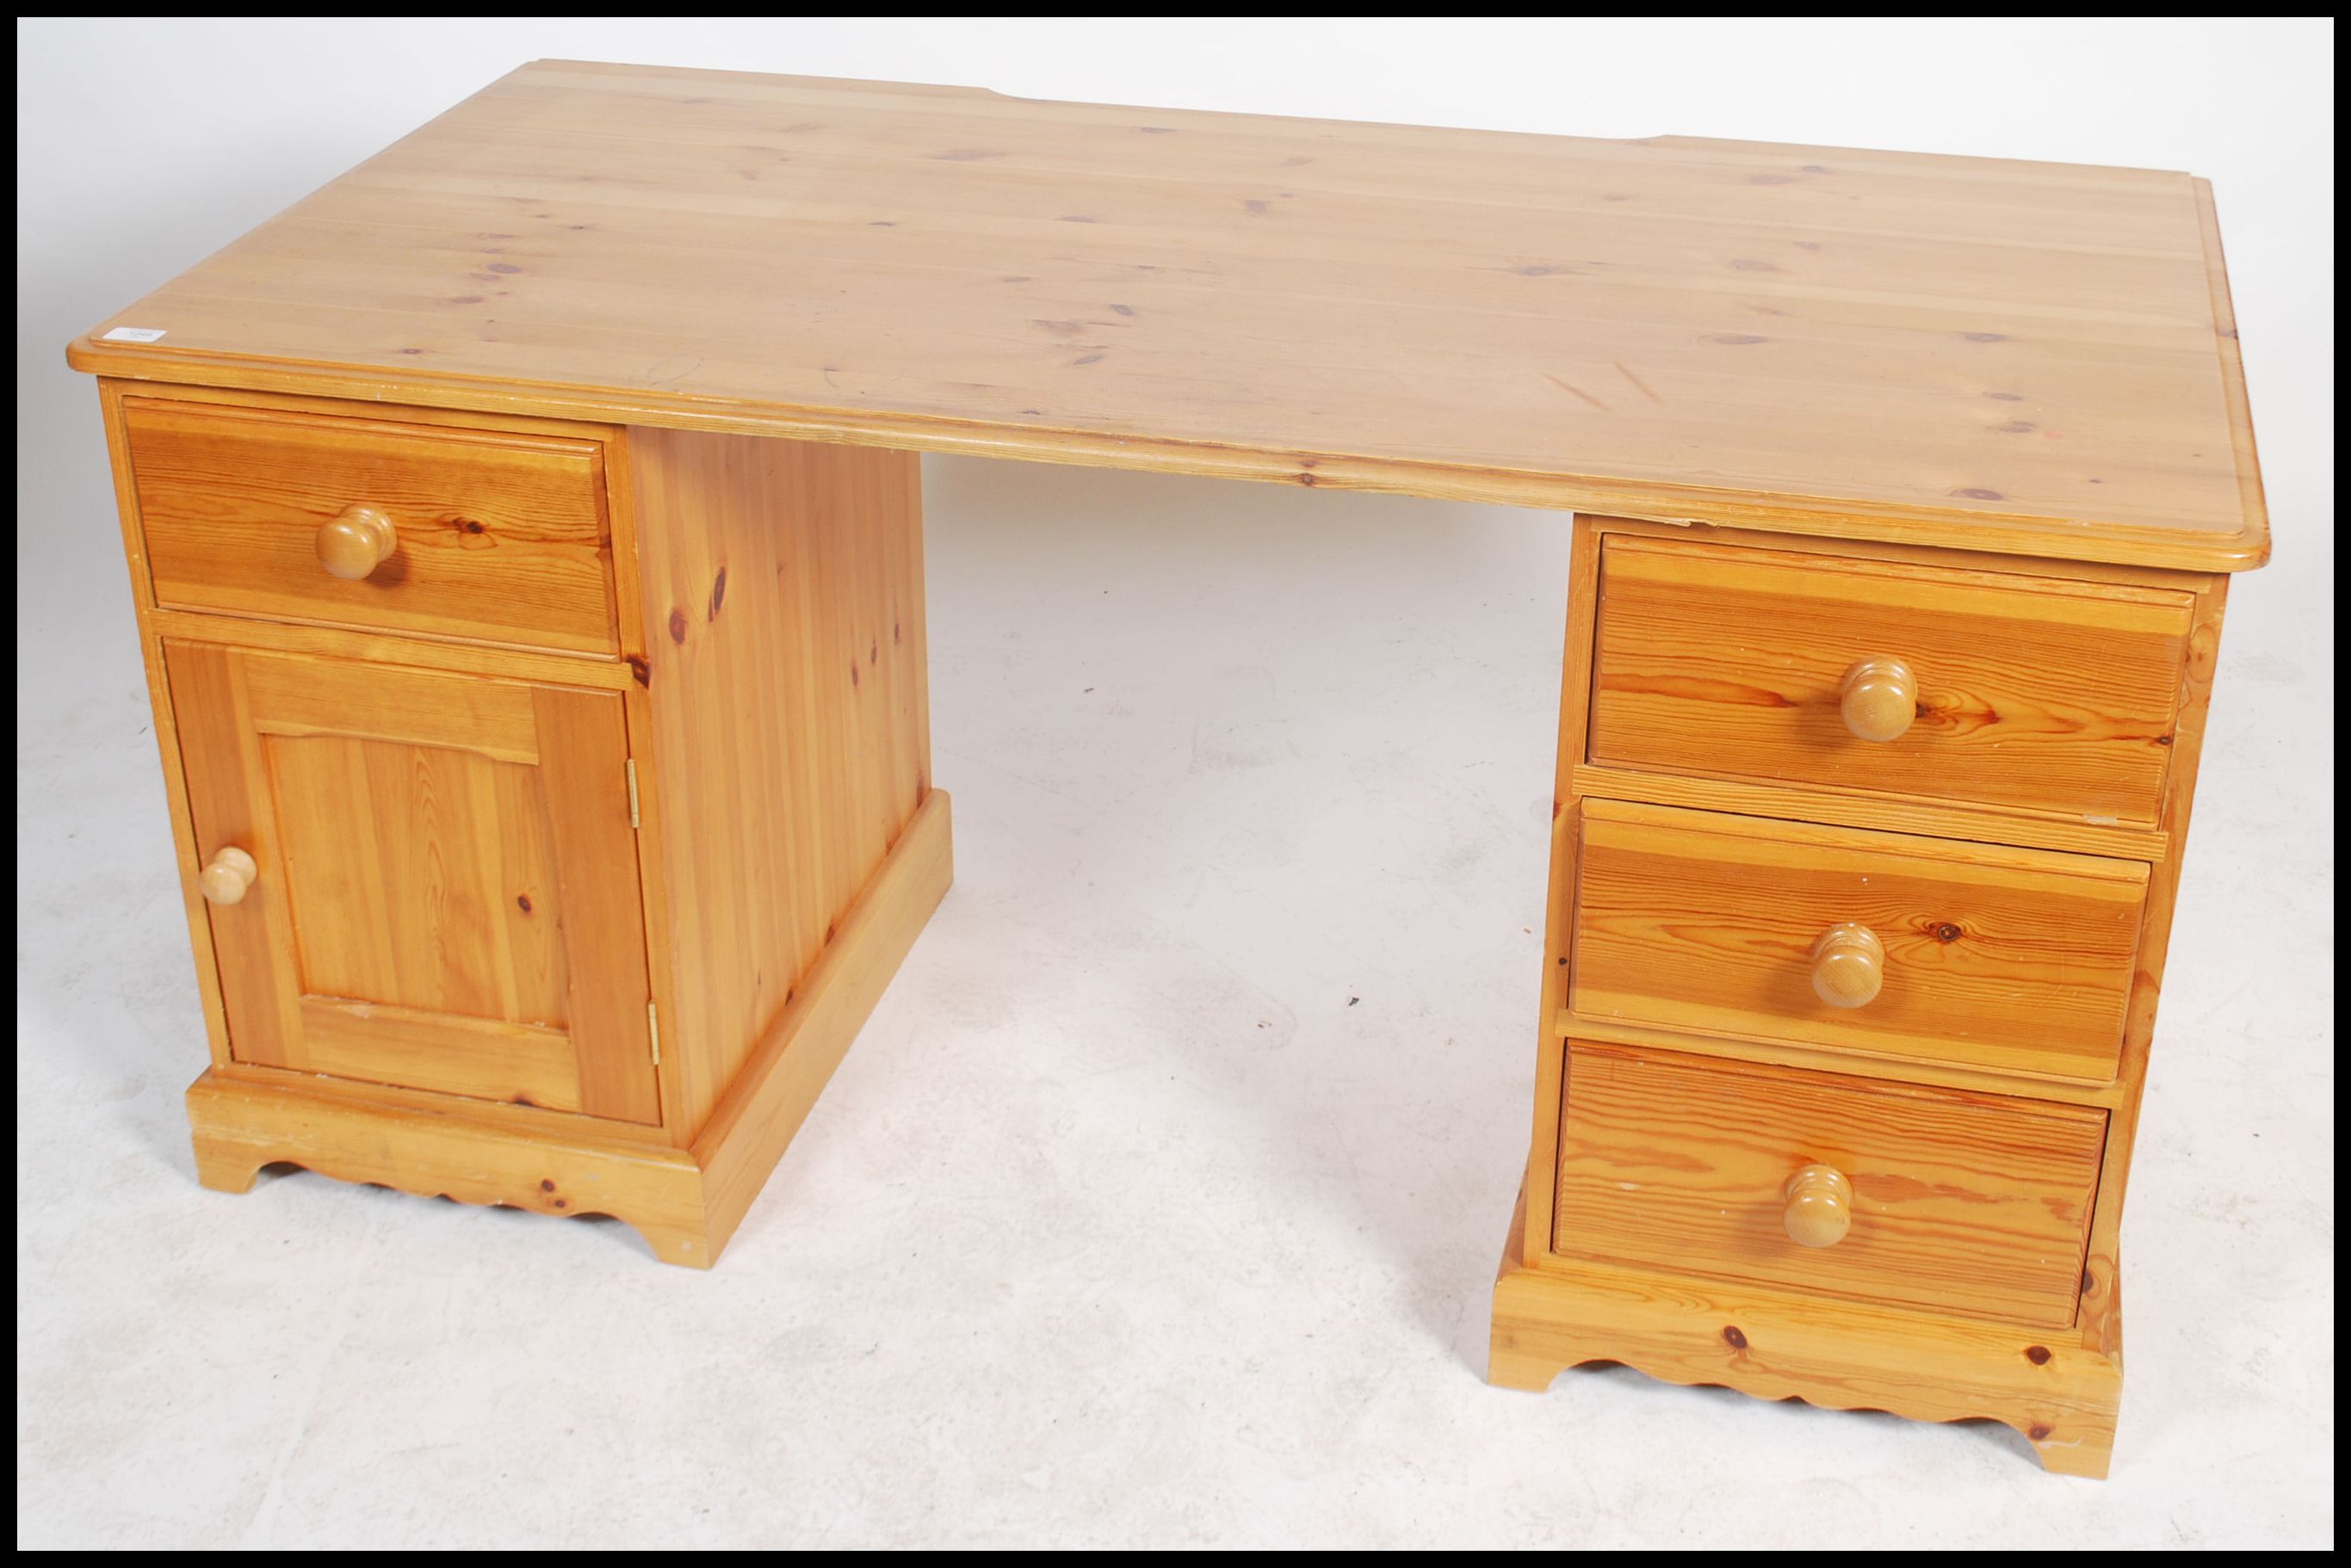 A 20th century contemporary twin pedestal pine knee hole desk having an arrangement of drawers - Image 2 of 5